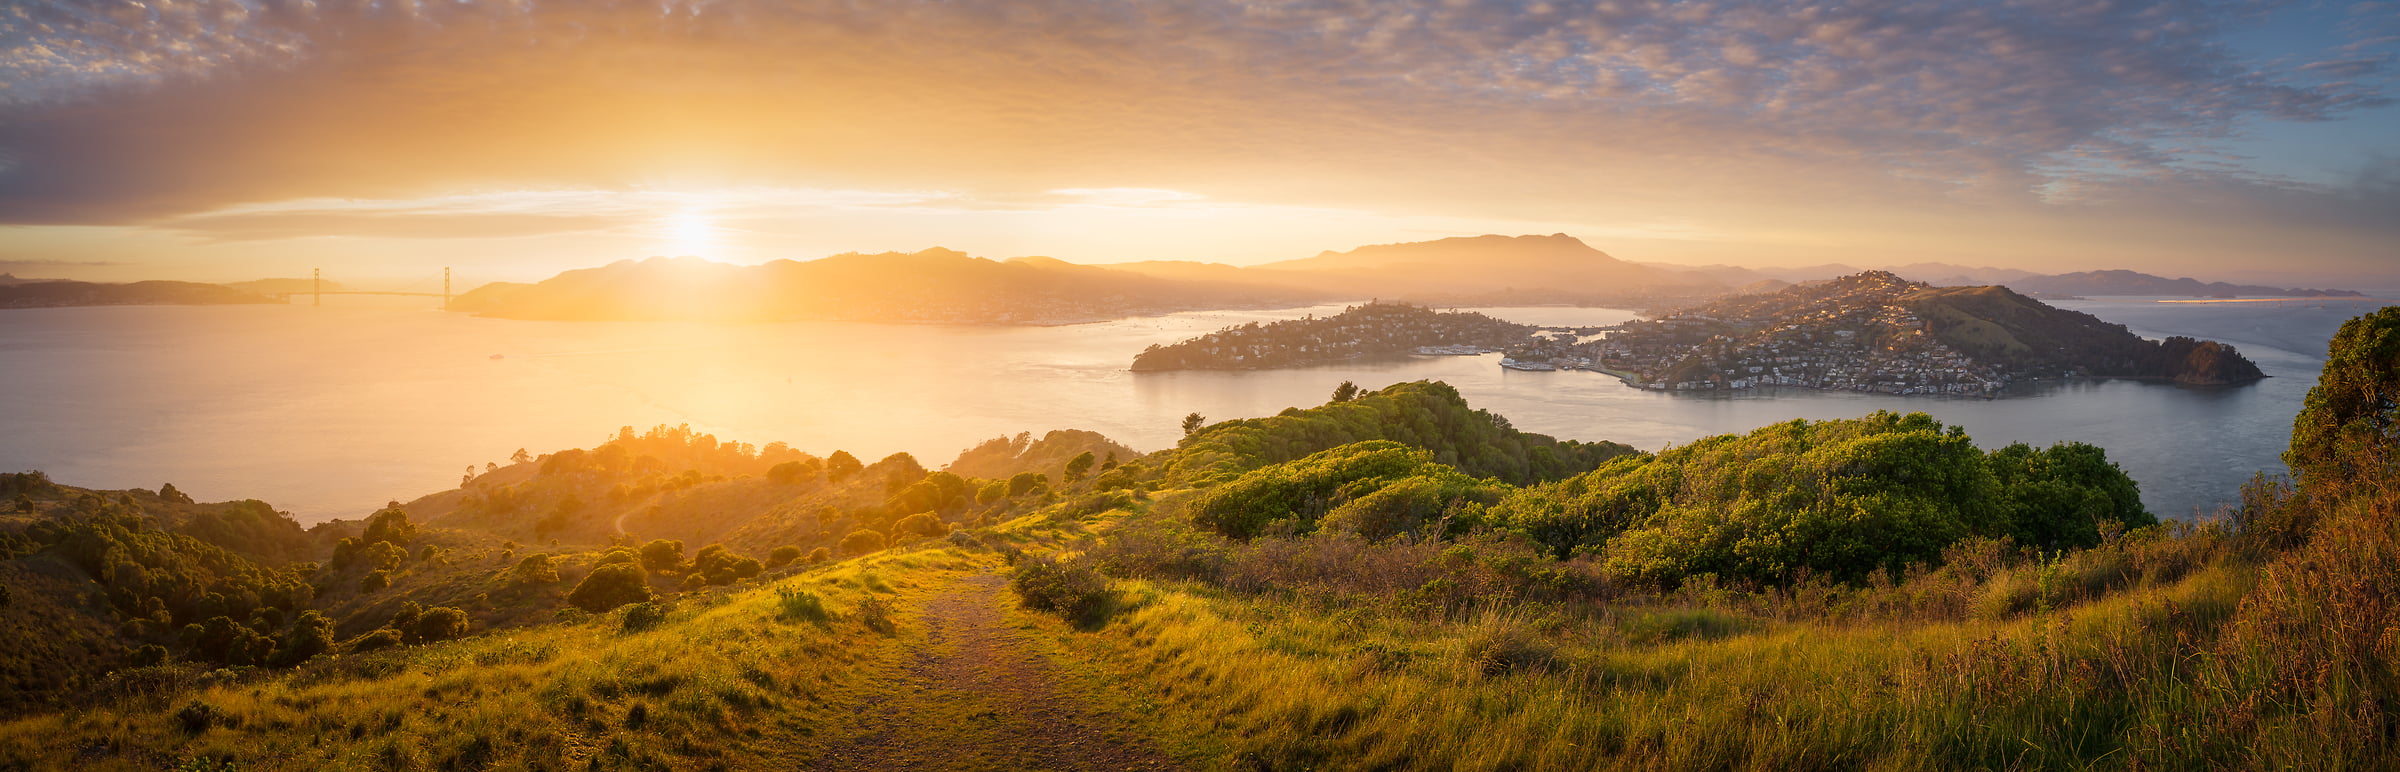 145 megapixels! A very high resolution, large-format VAST photo print of an inspirational pathway at sunset; landscape photograph created by Jeff Lewis in Marin County, California.